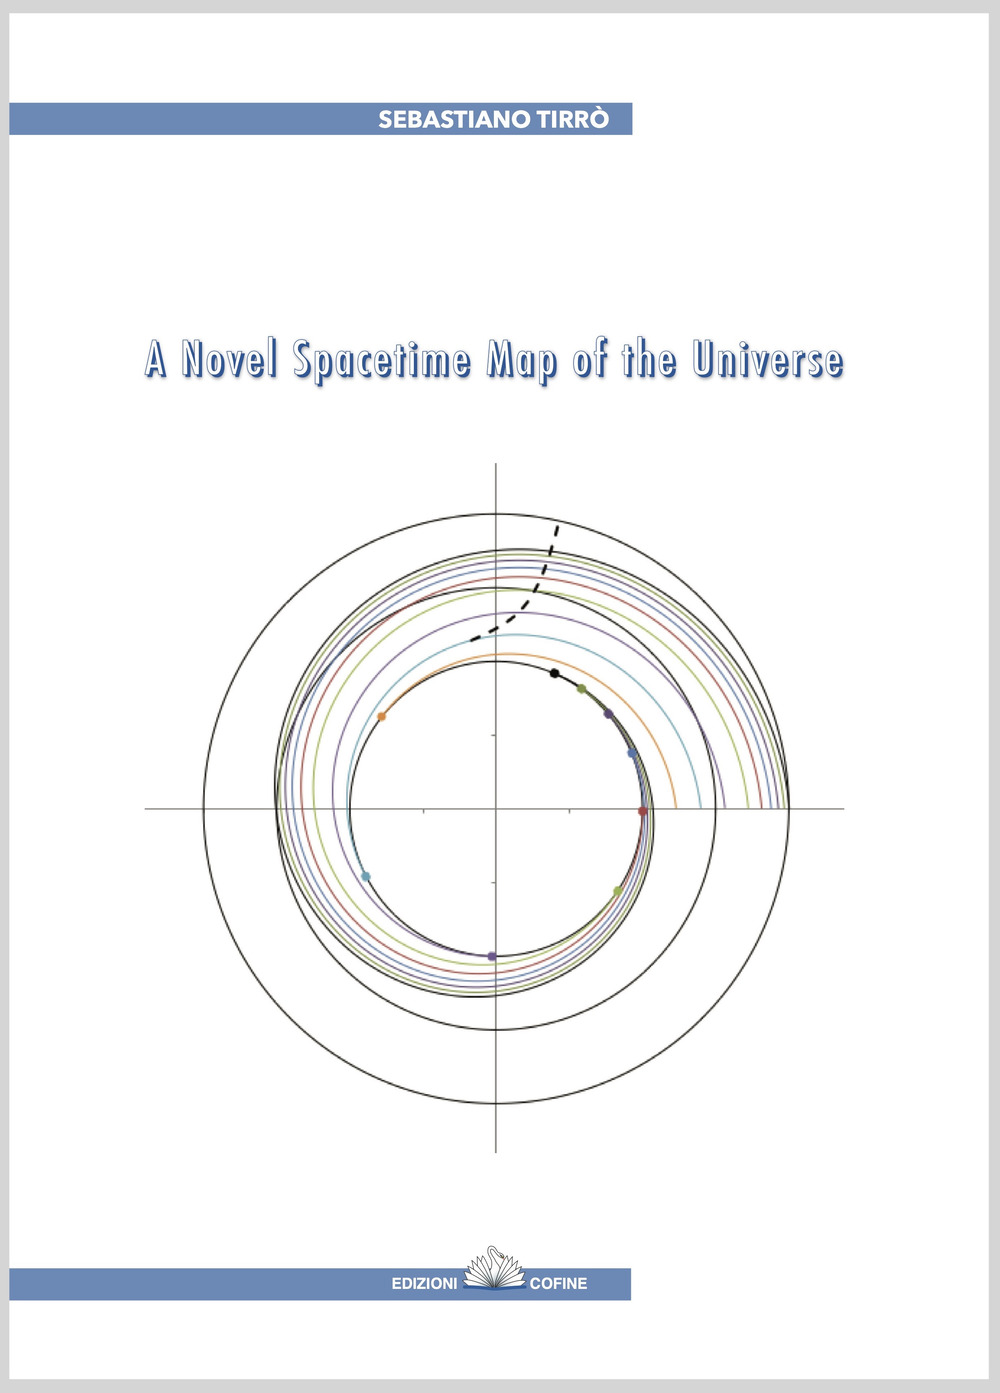 A novel spacetime map of the universe